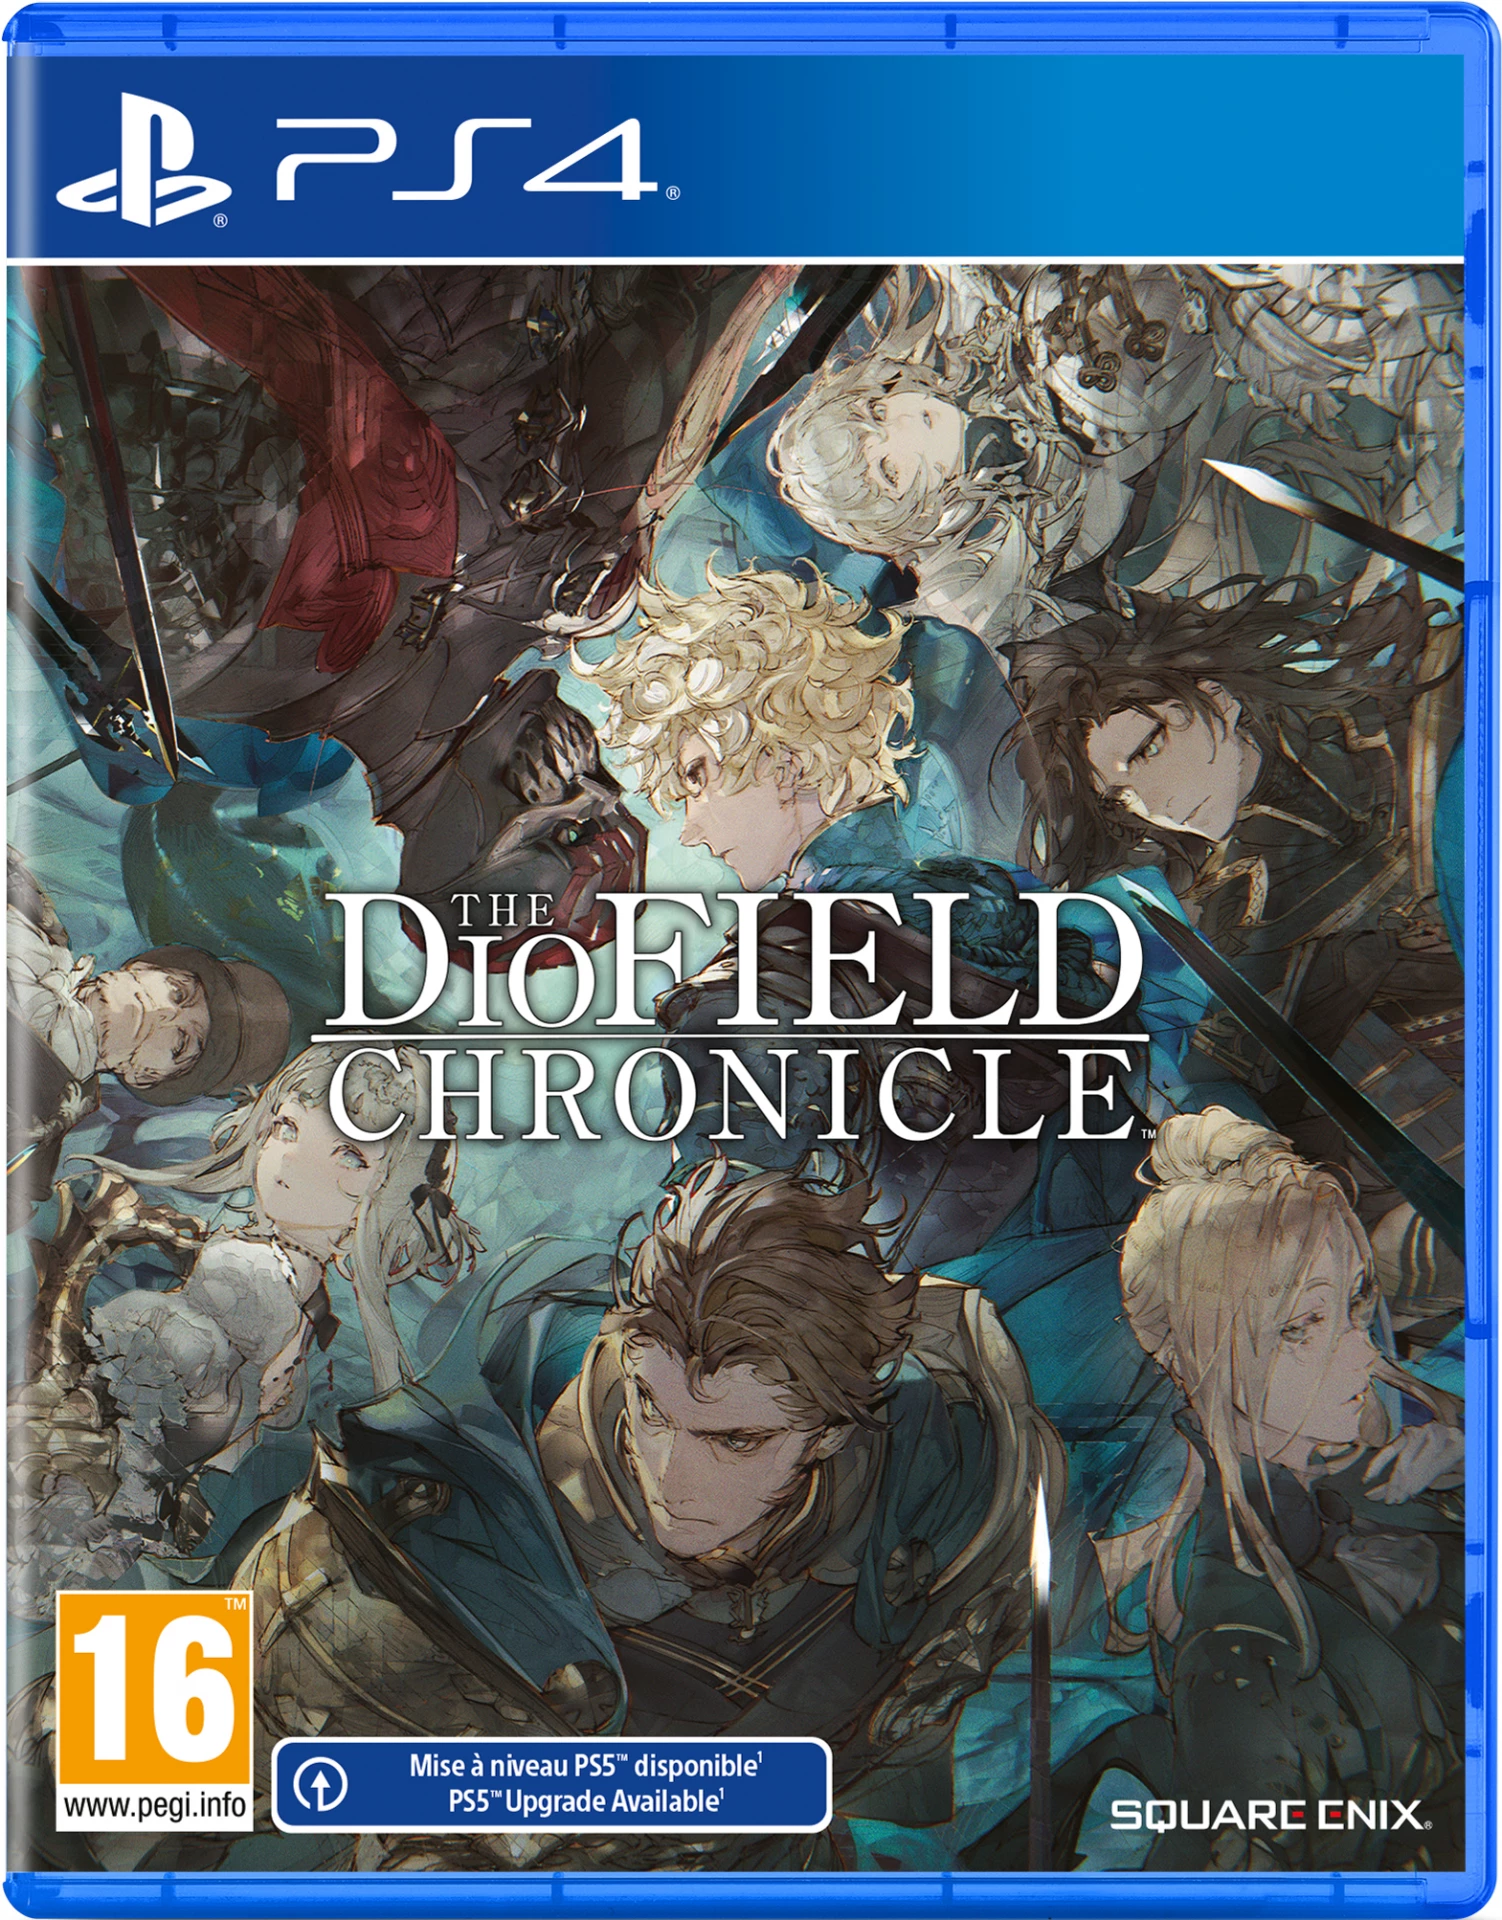 The Diofield Chronicle (PS4), Square Enix